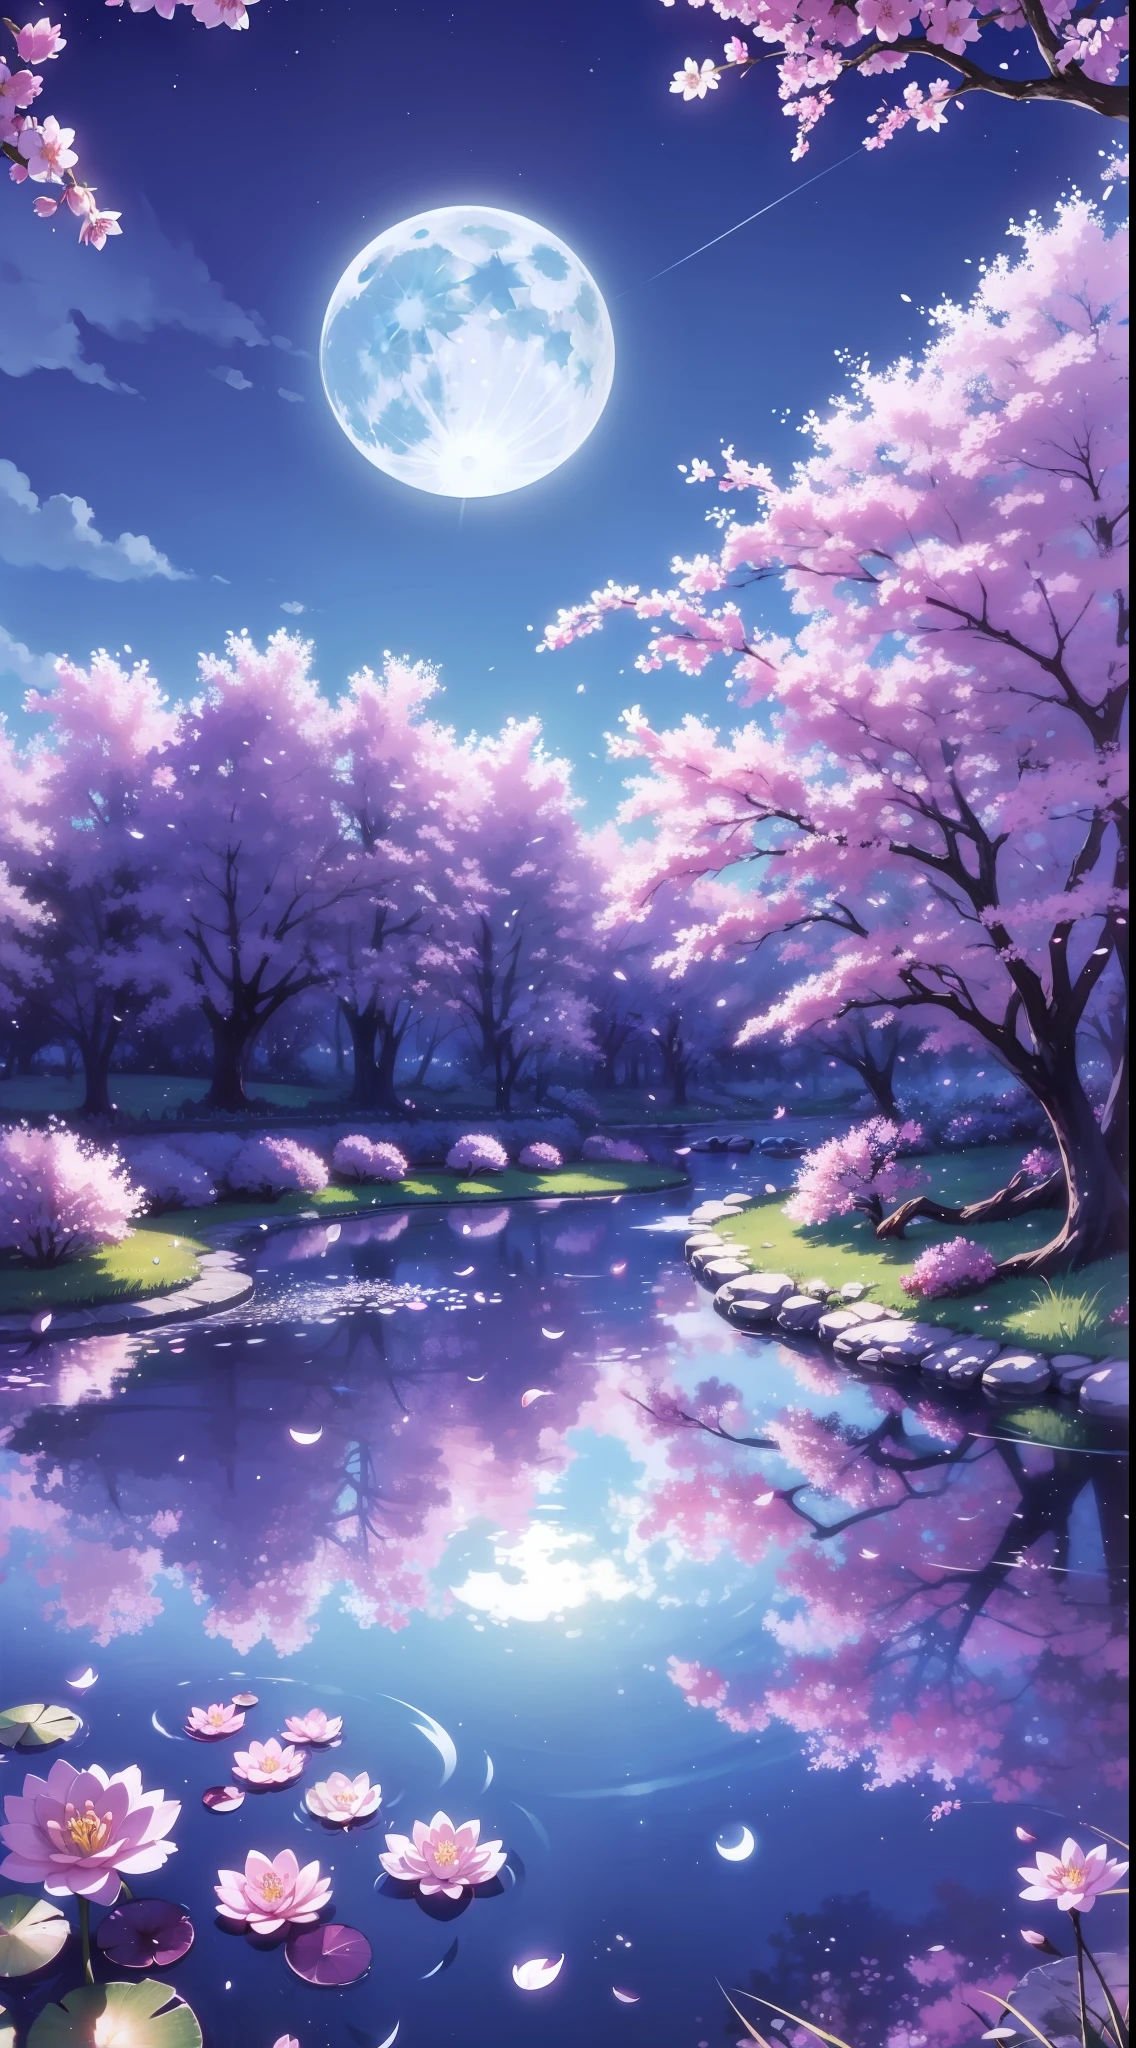 background, forest, pond in the middle, cherry blossoms, night, moon, blue sky, blue grass, reflection, high detail, lilypads, high quality